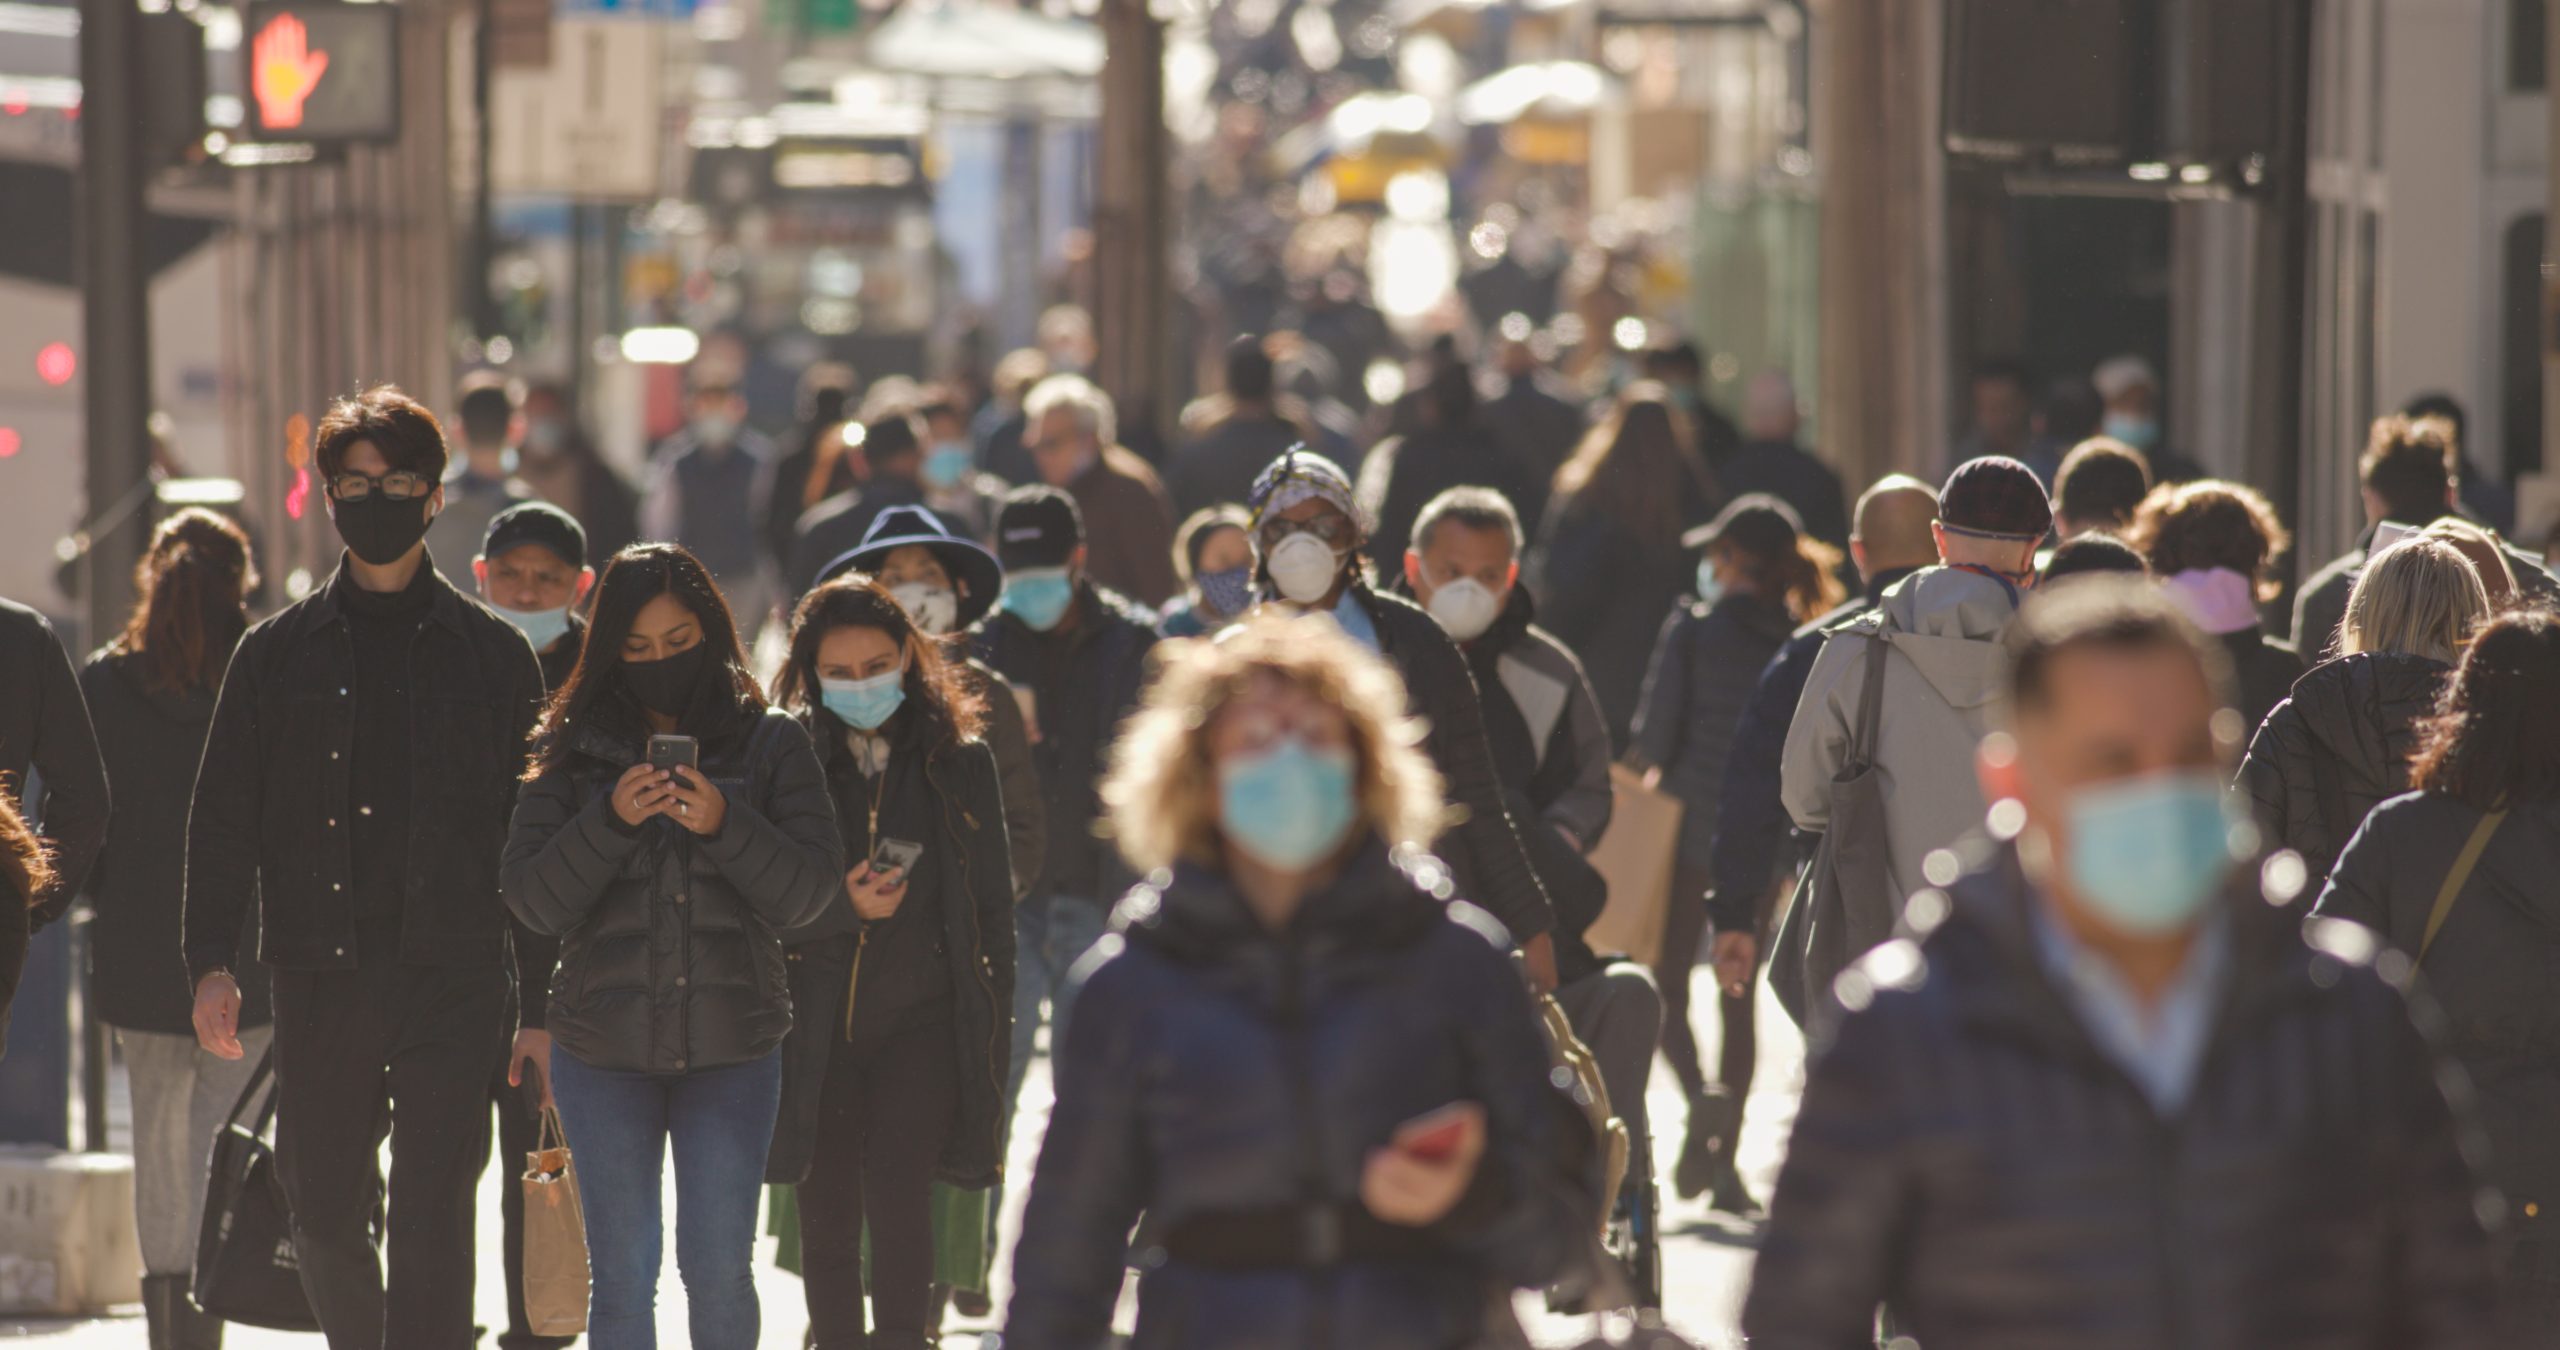 New York circa November 2020: Crowd of people walking on the street wearing masks during COVID-19 pandemic. Credit: blvdone / Shutterstock.com.